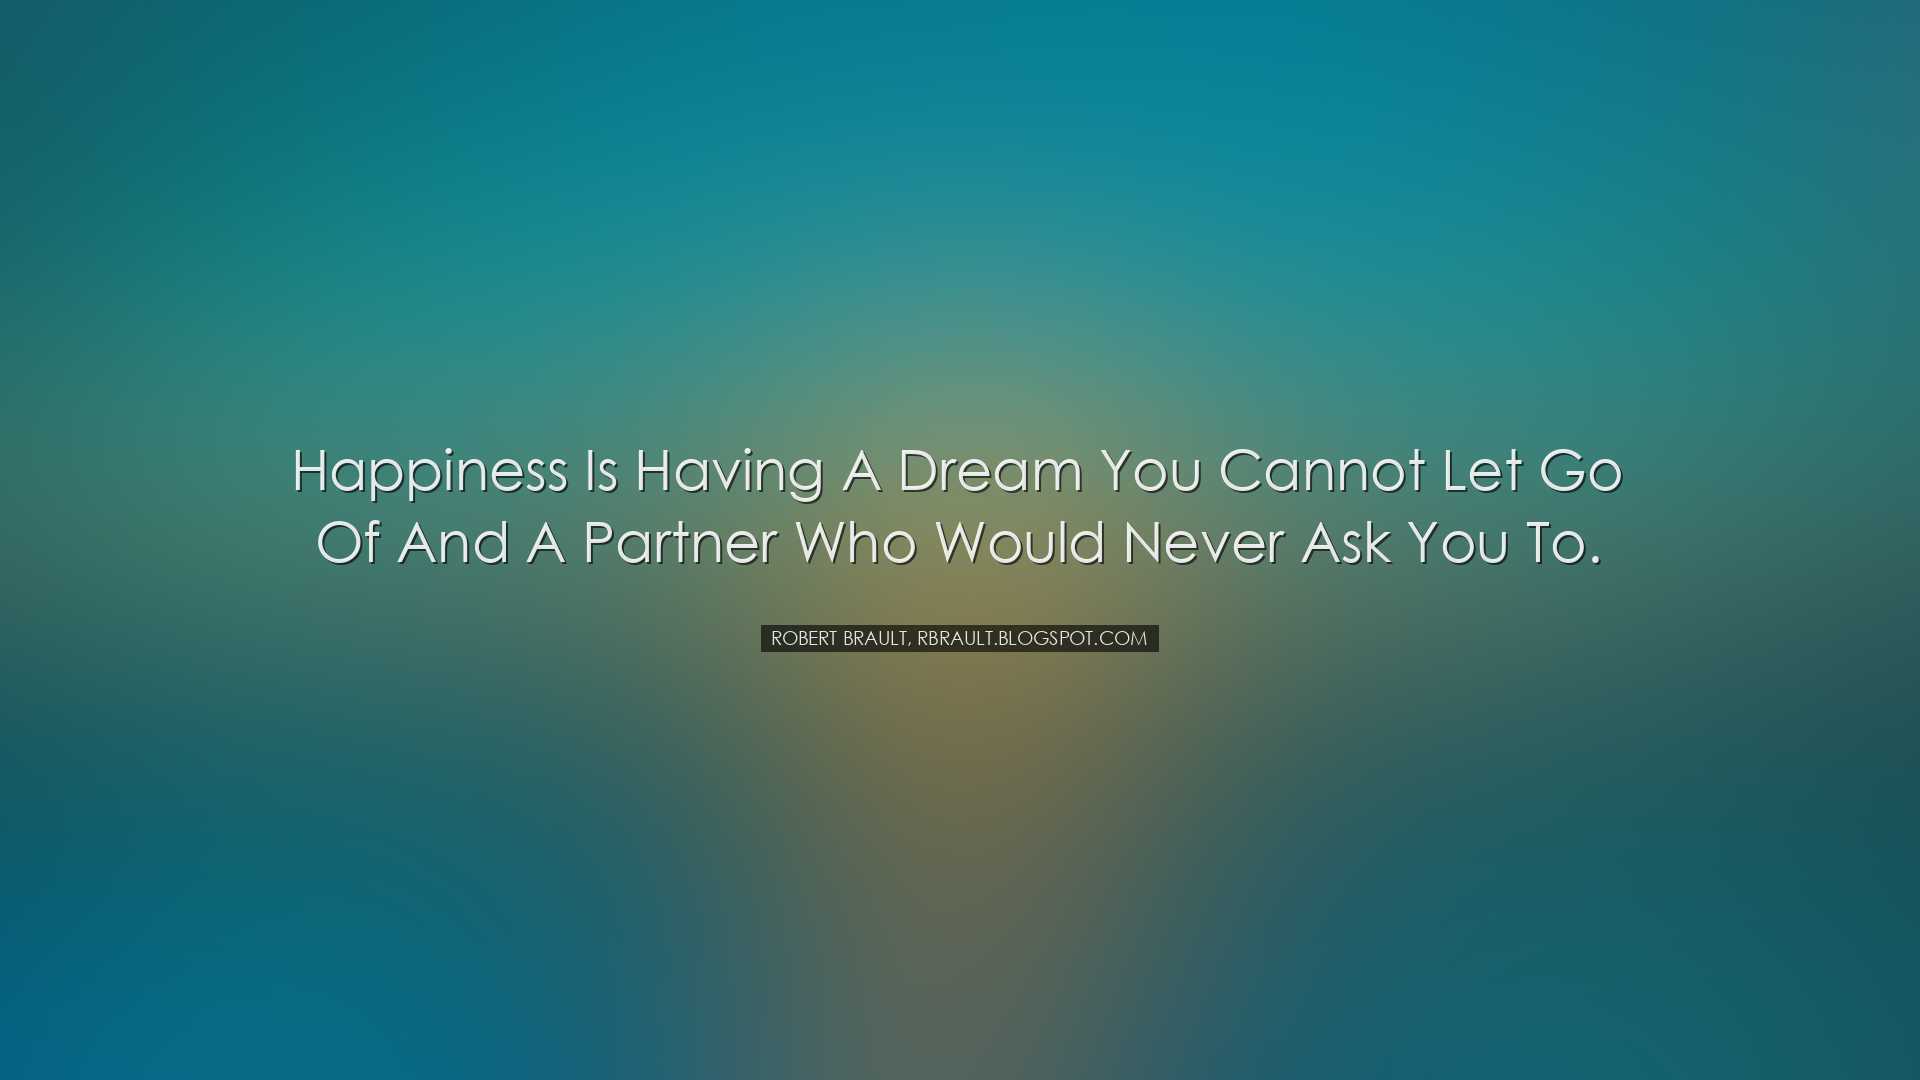 Happiness is having a dream you cannot let go of and a partner who